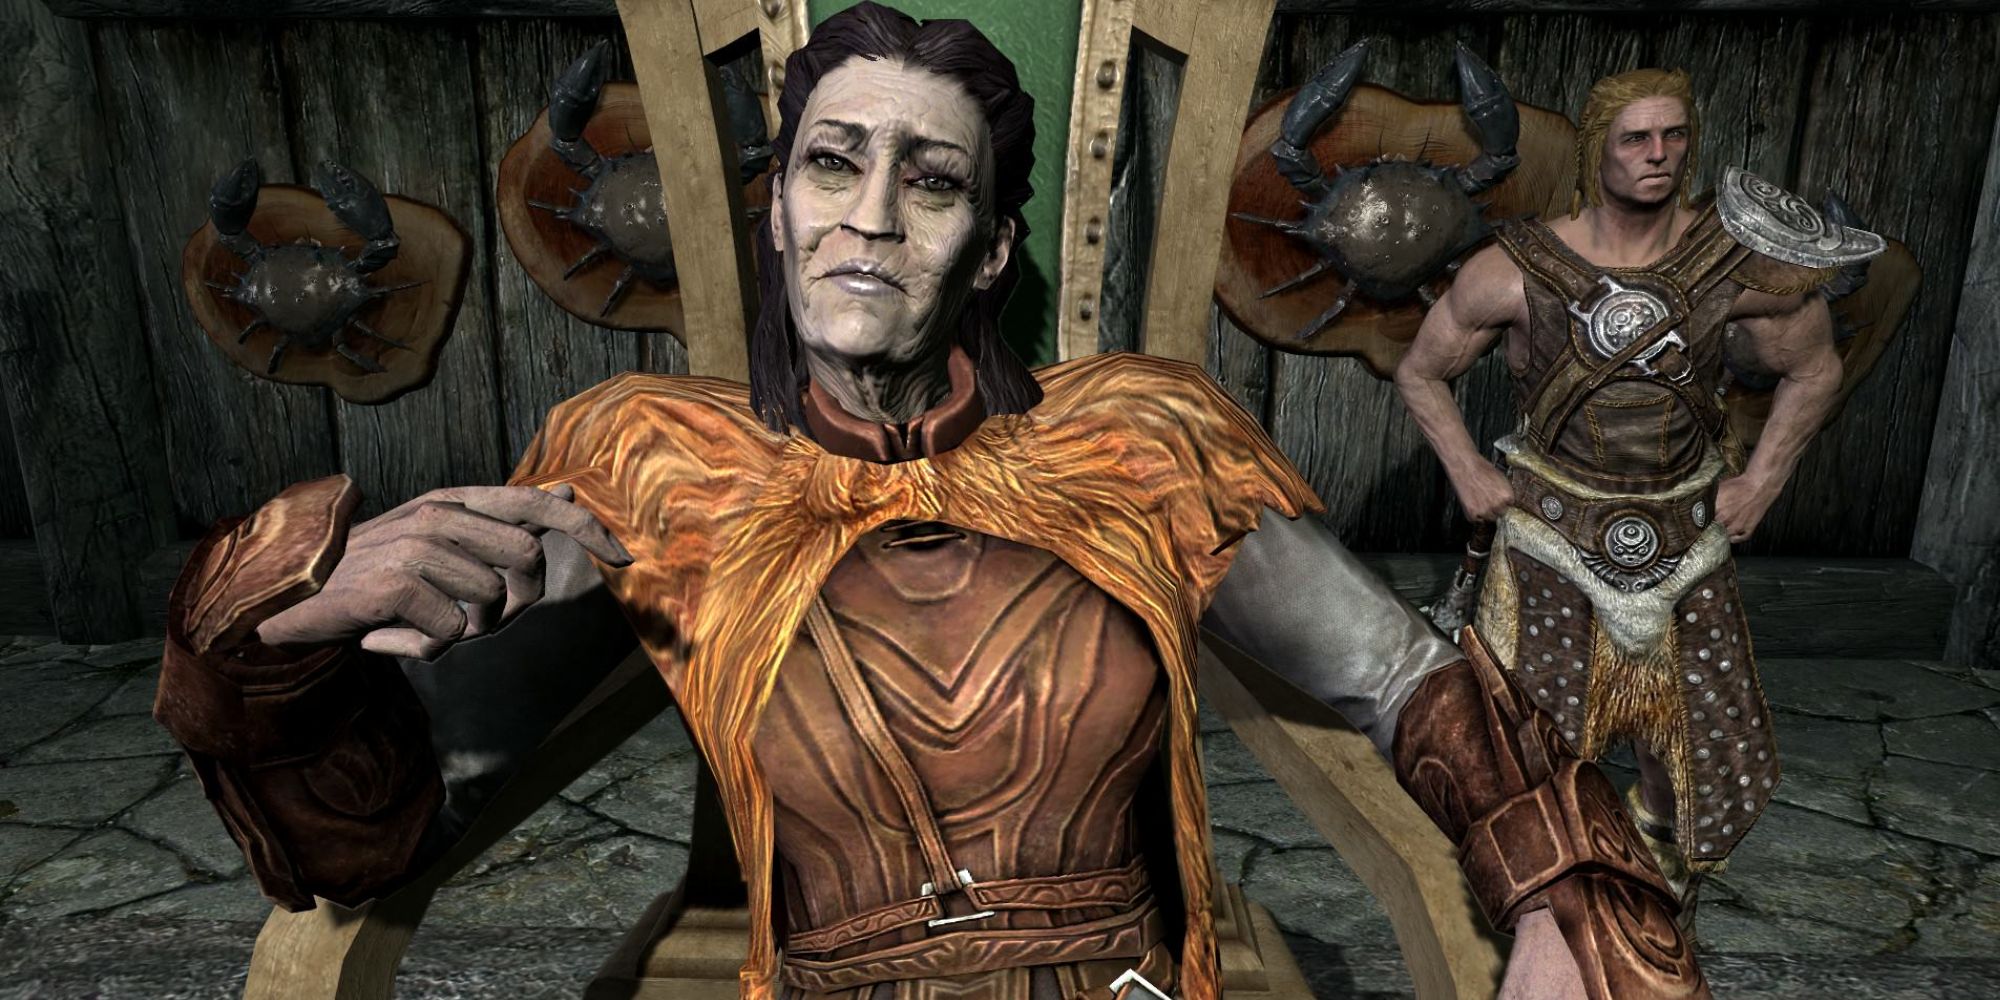 Jarl Idgrod Ravencrone sits in a chair and stares at the camera